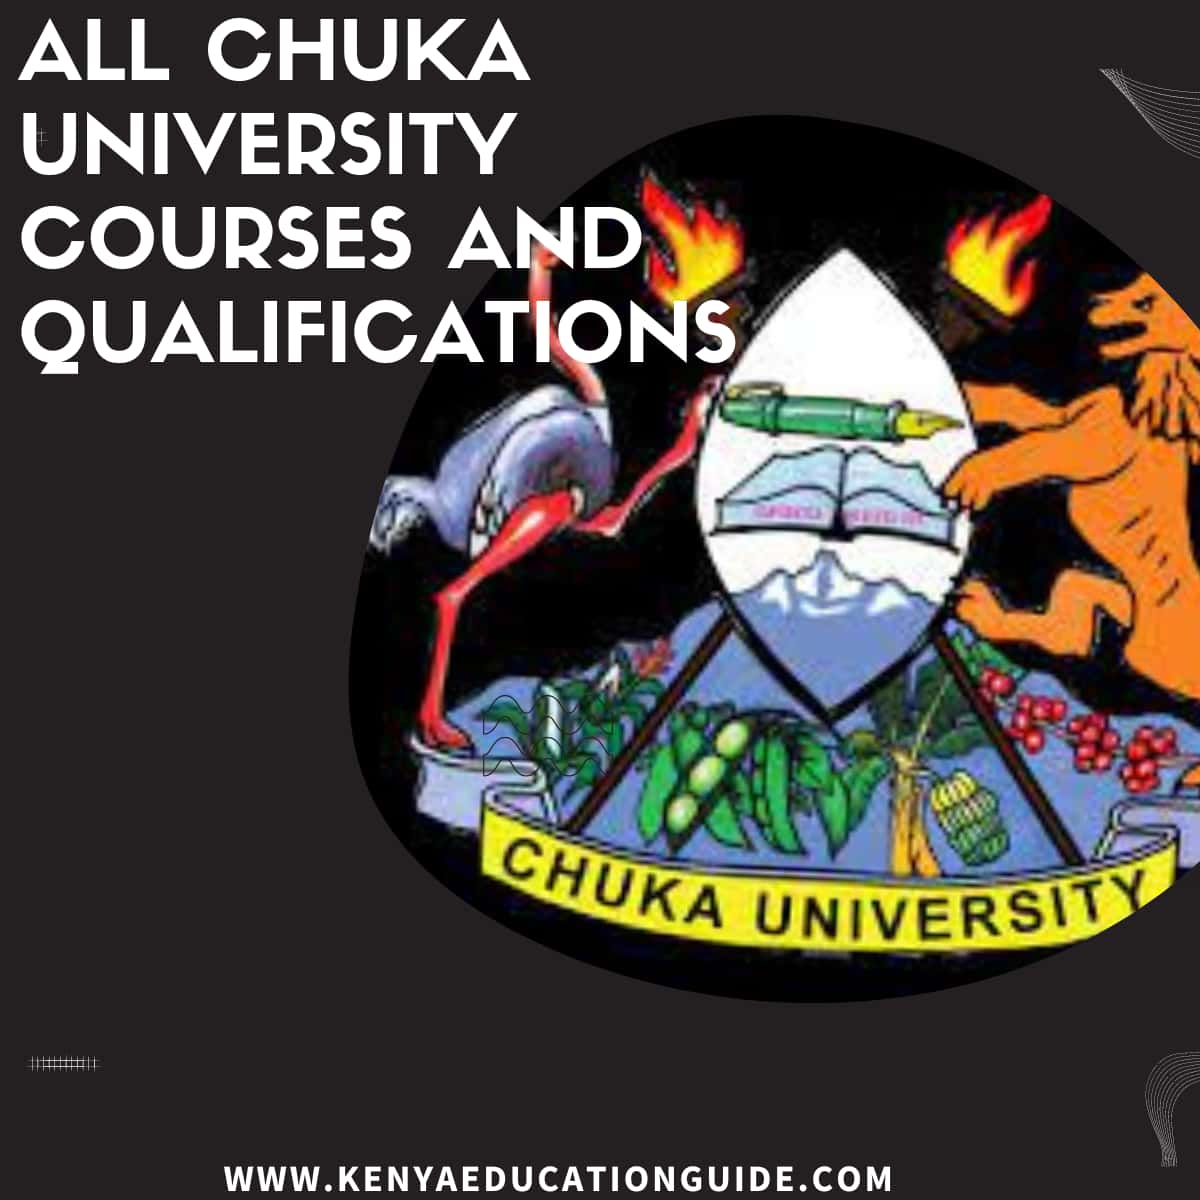 Chuka University Courses and Qualifications